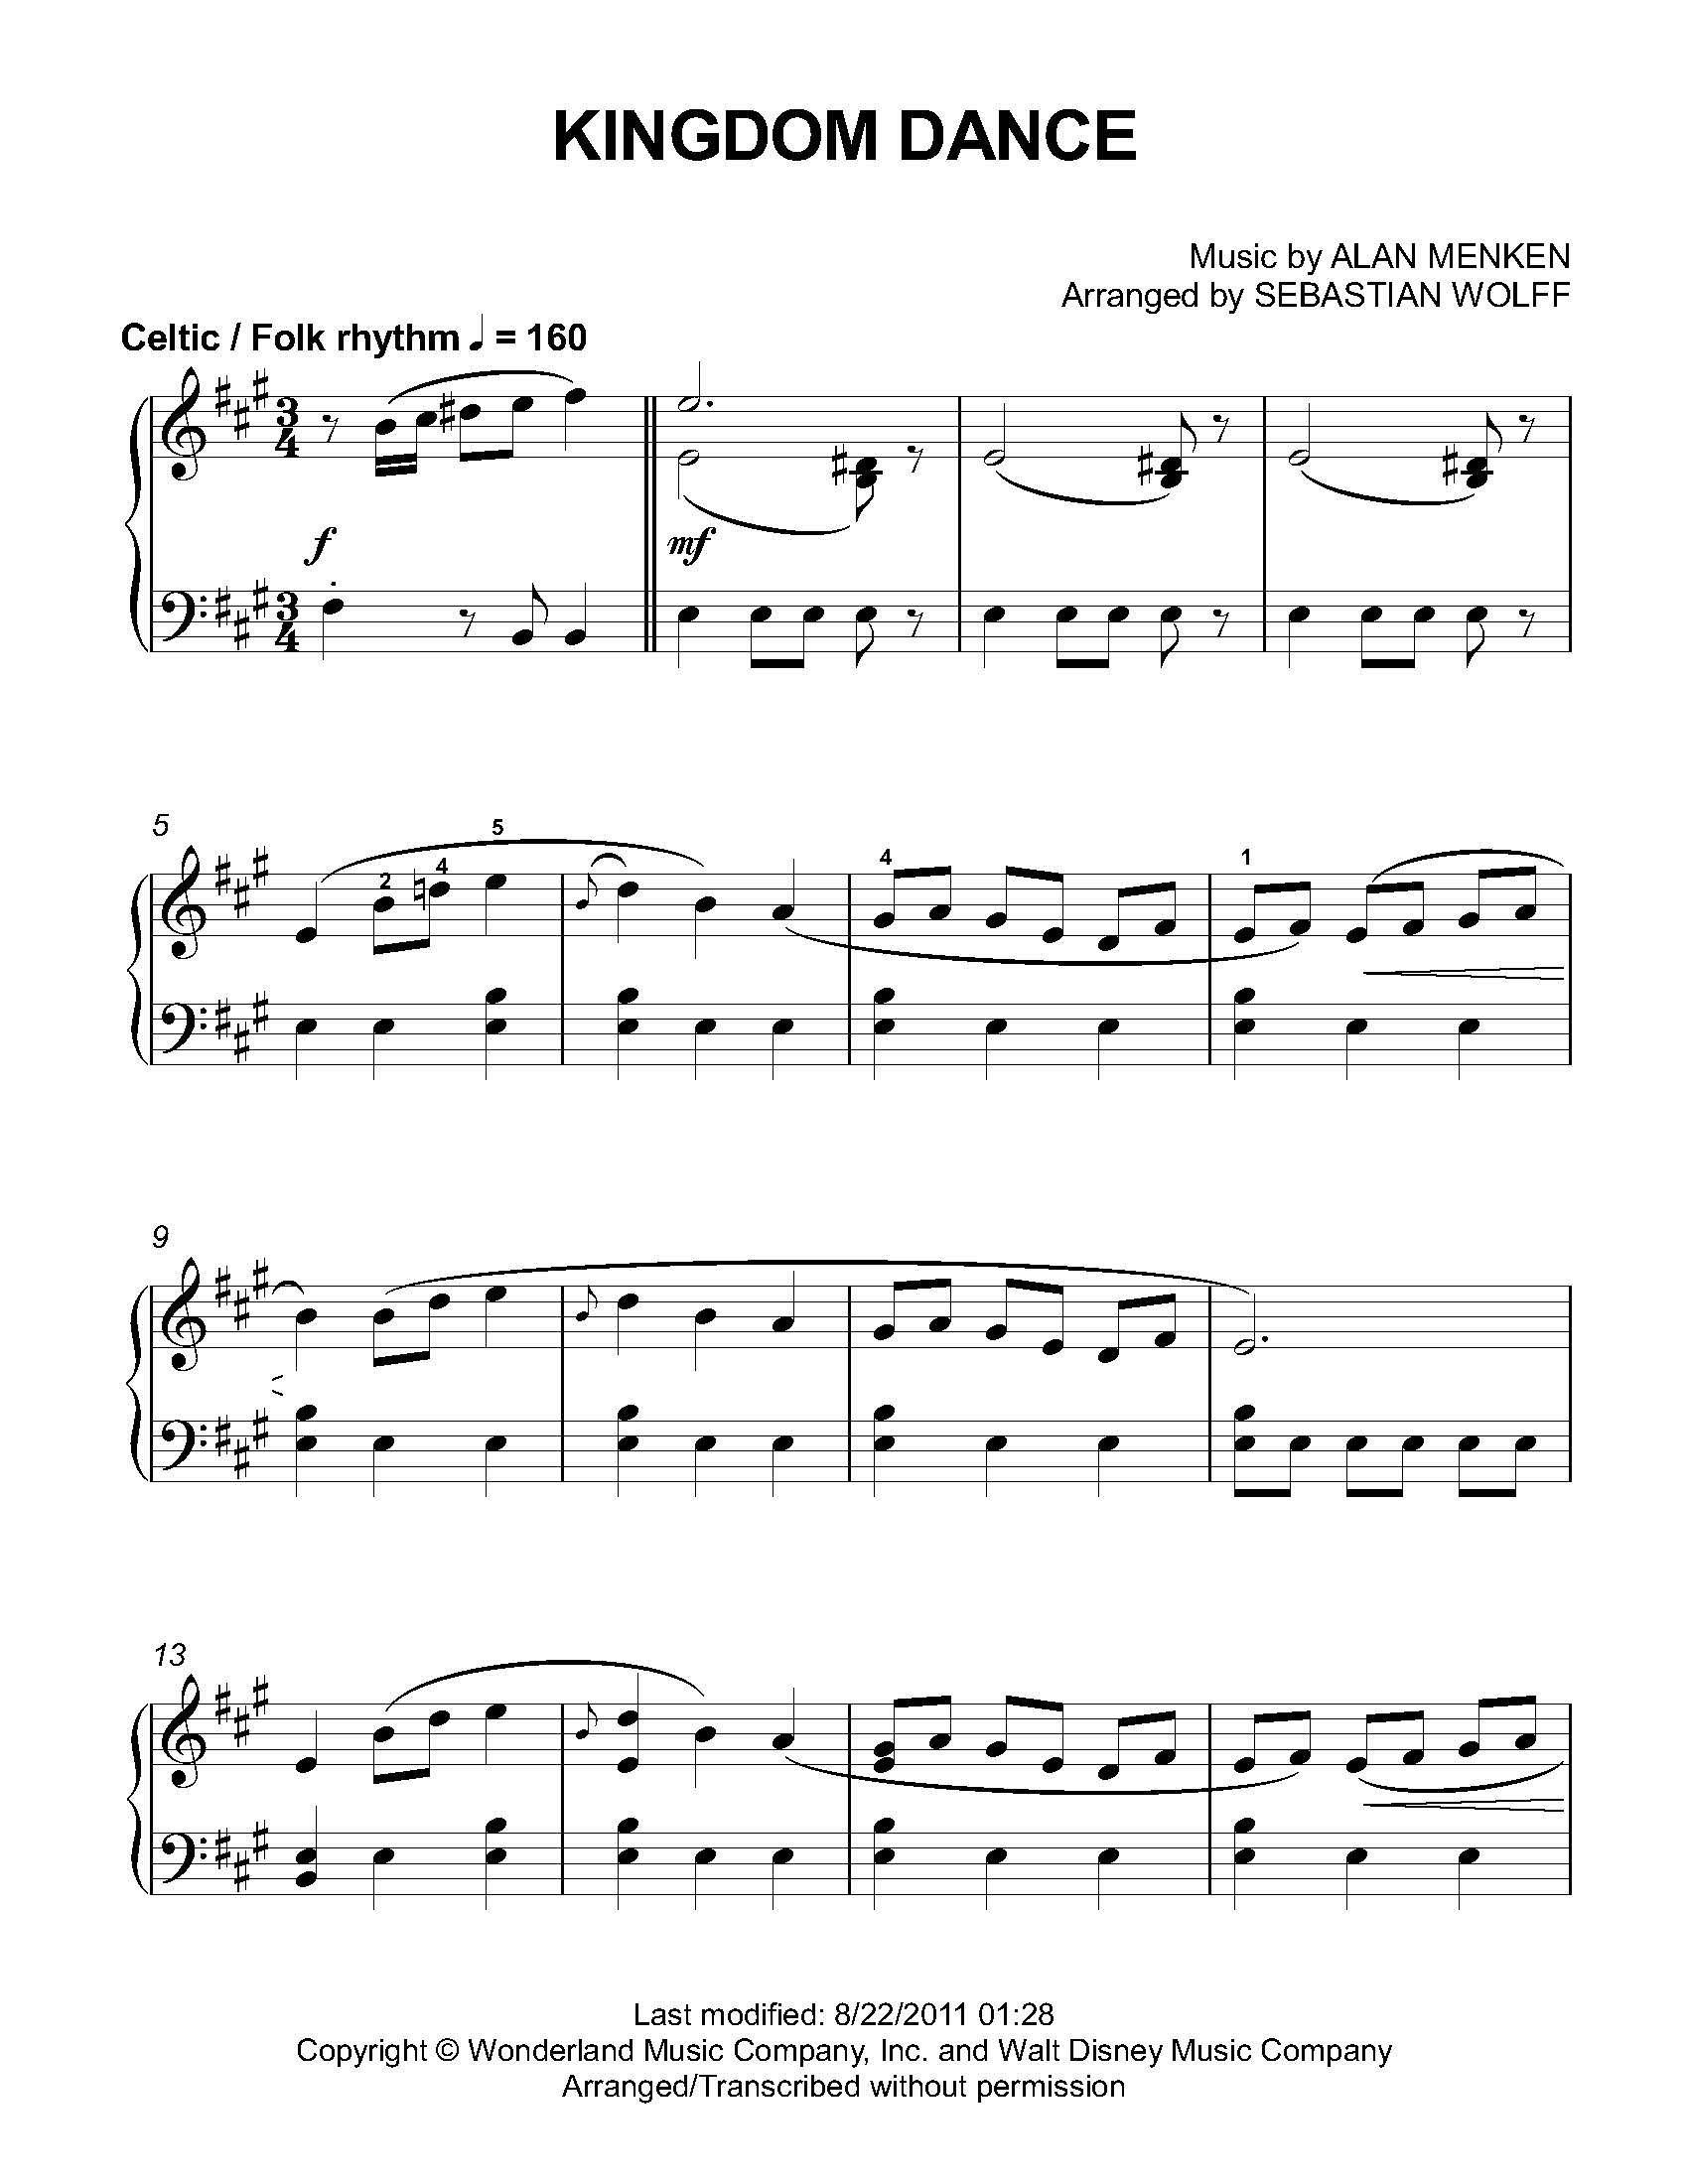 Sheet Music For The Kingdom Dance From Disney&amp;#039;s Tangled. Love It - Free Printable Piano Sheet Music For Popular Songs